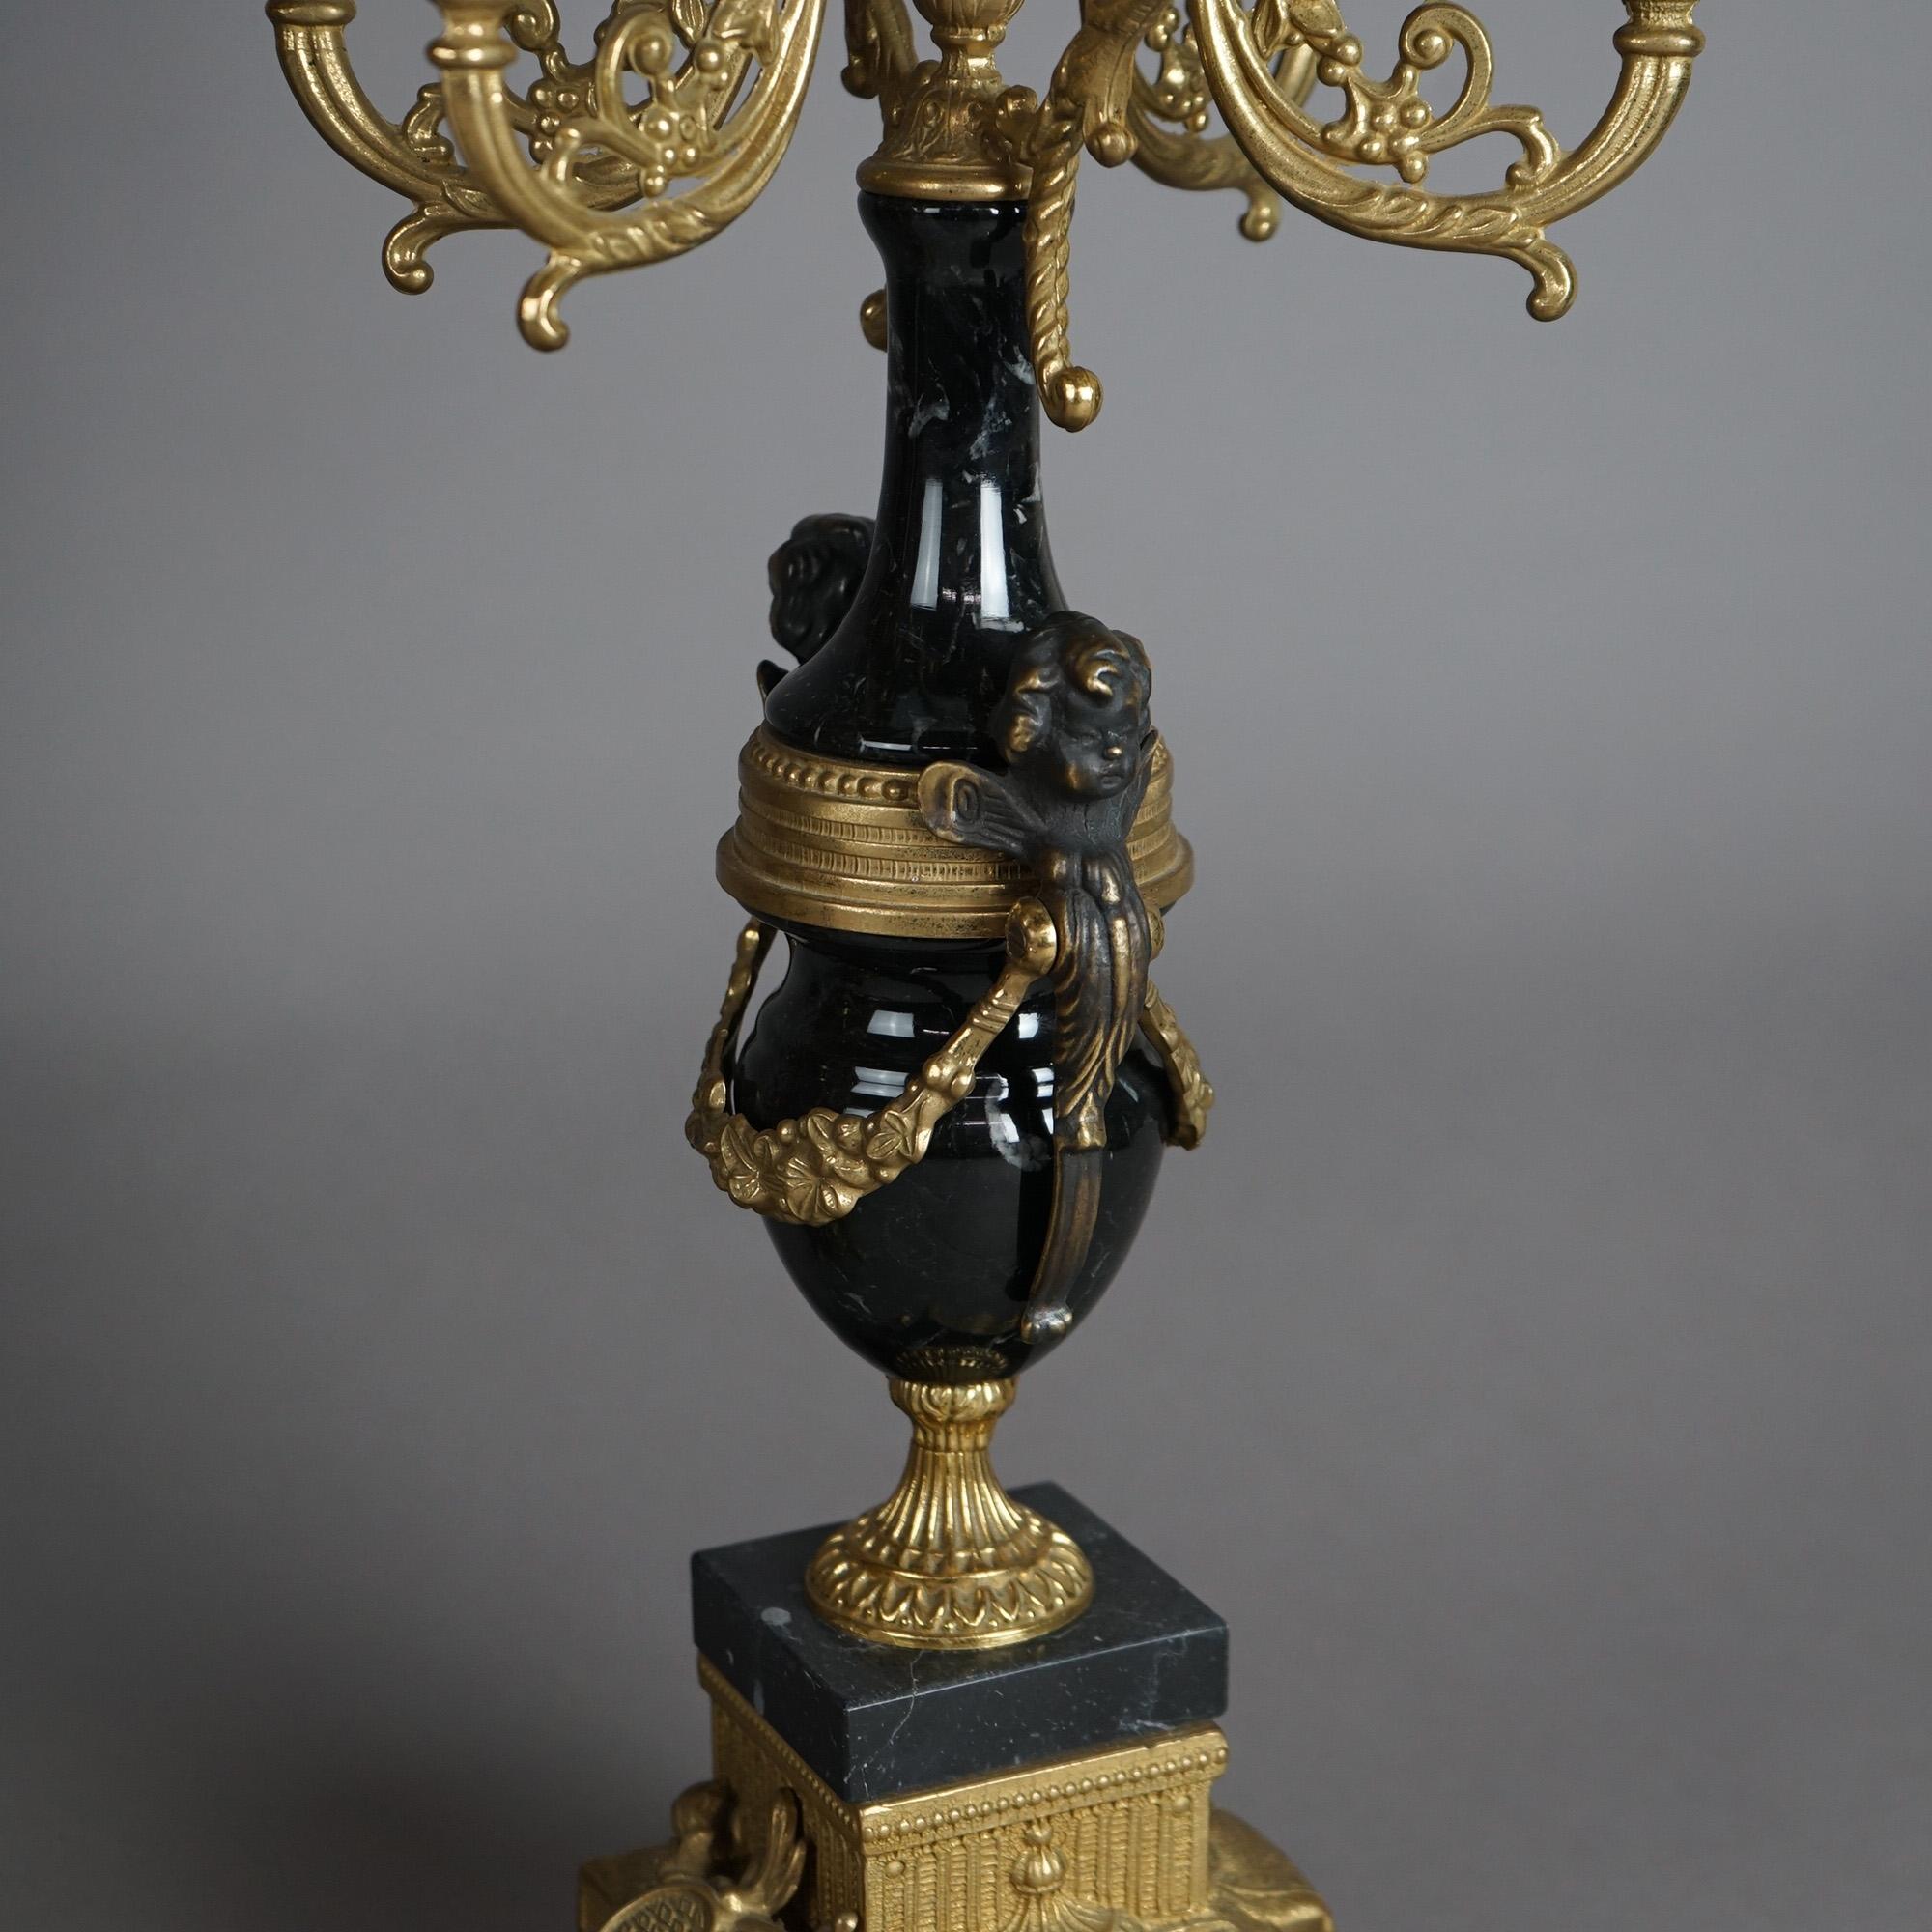 A pair of French Empire style candelabra offers gilt bronze and ebonized construction with scrolled foliate form arms terminating in candle sockets; ebonized base with cherub masks and gilt bronze footed mounts, 20thC

Measures - 24.5